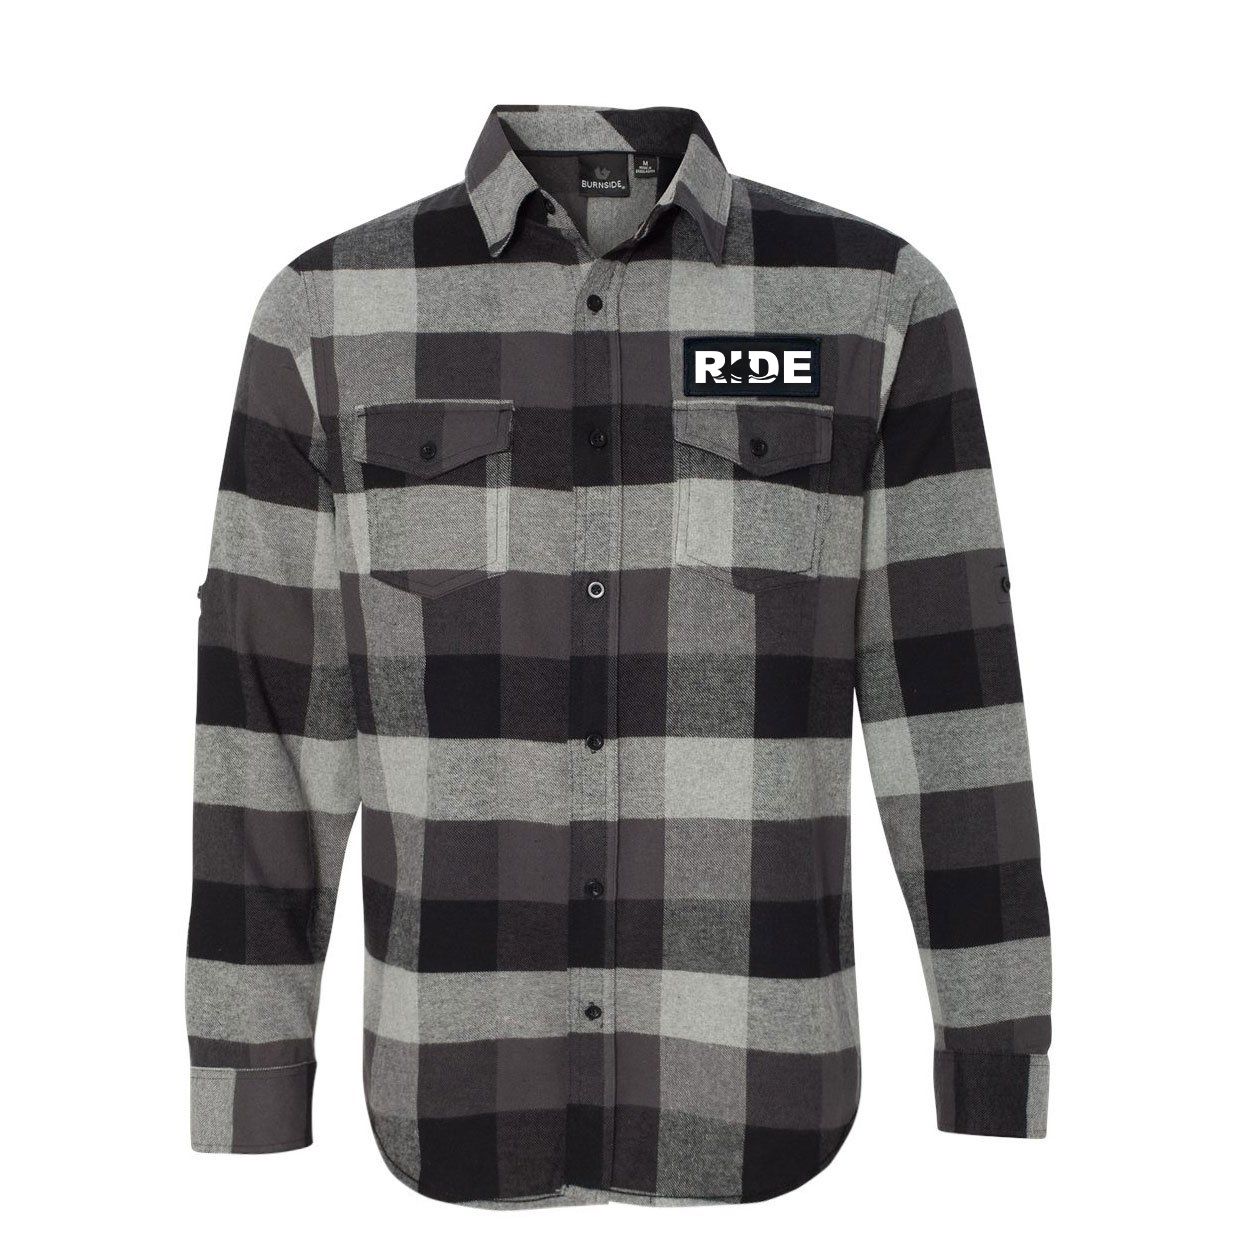 Ride Wave Logo Classic Unisex Long Sleeve Woven Patch Flannel Shirt Black/Gray (White Logo)